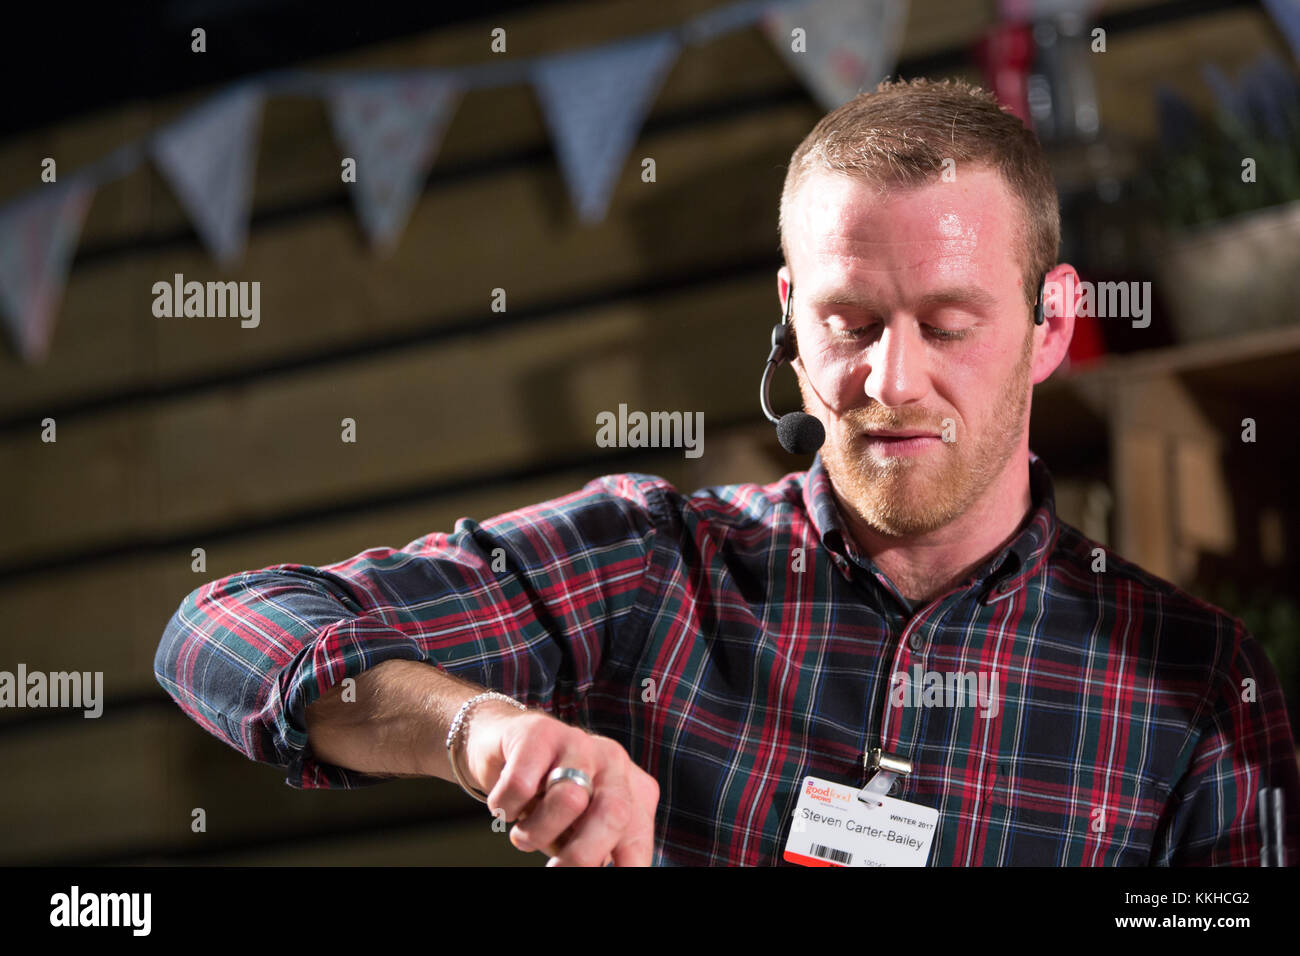 Steven Carter Bailey from this years Great British Bake Off on the Winter Kitchen stage doing a cooking demo inspired by the winter season. Credit: steven roe/Alamy Live News Stock Photo